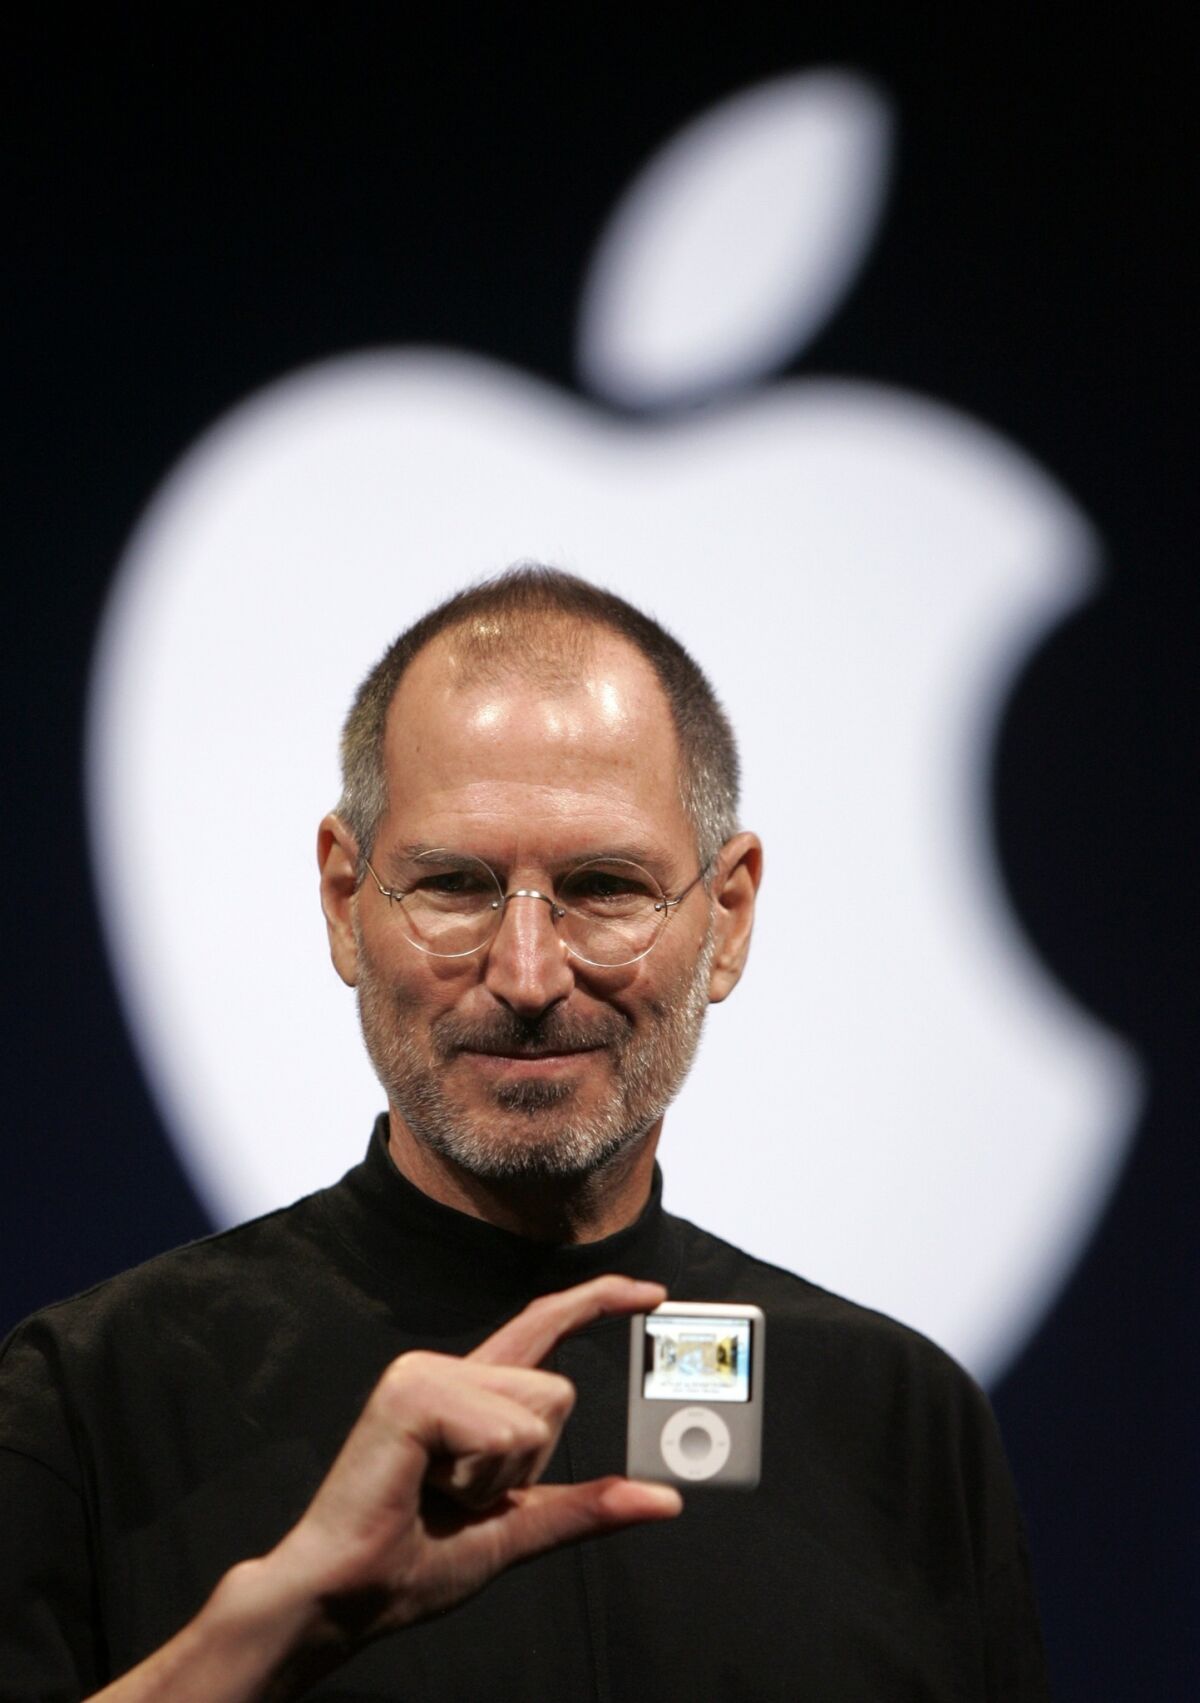 Steve Jobs, shown in 2007, will be featured on a U.S. postage stamp planned for 2015.